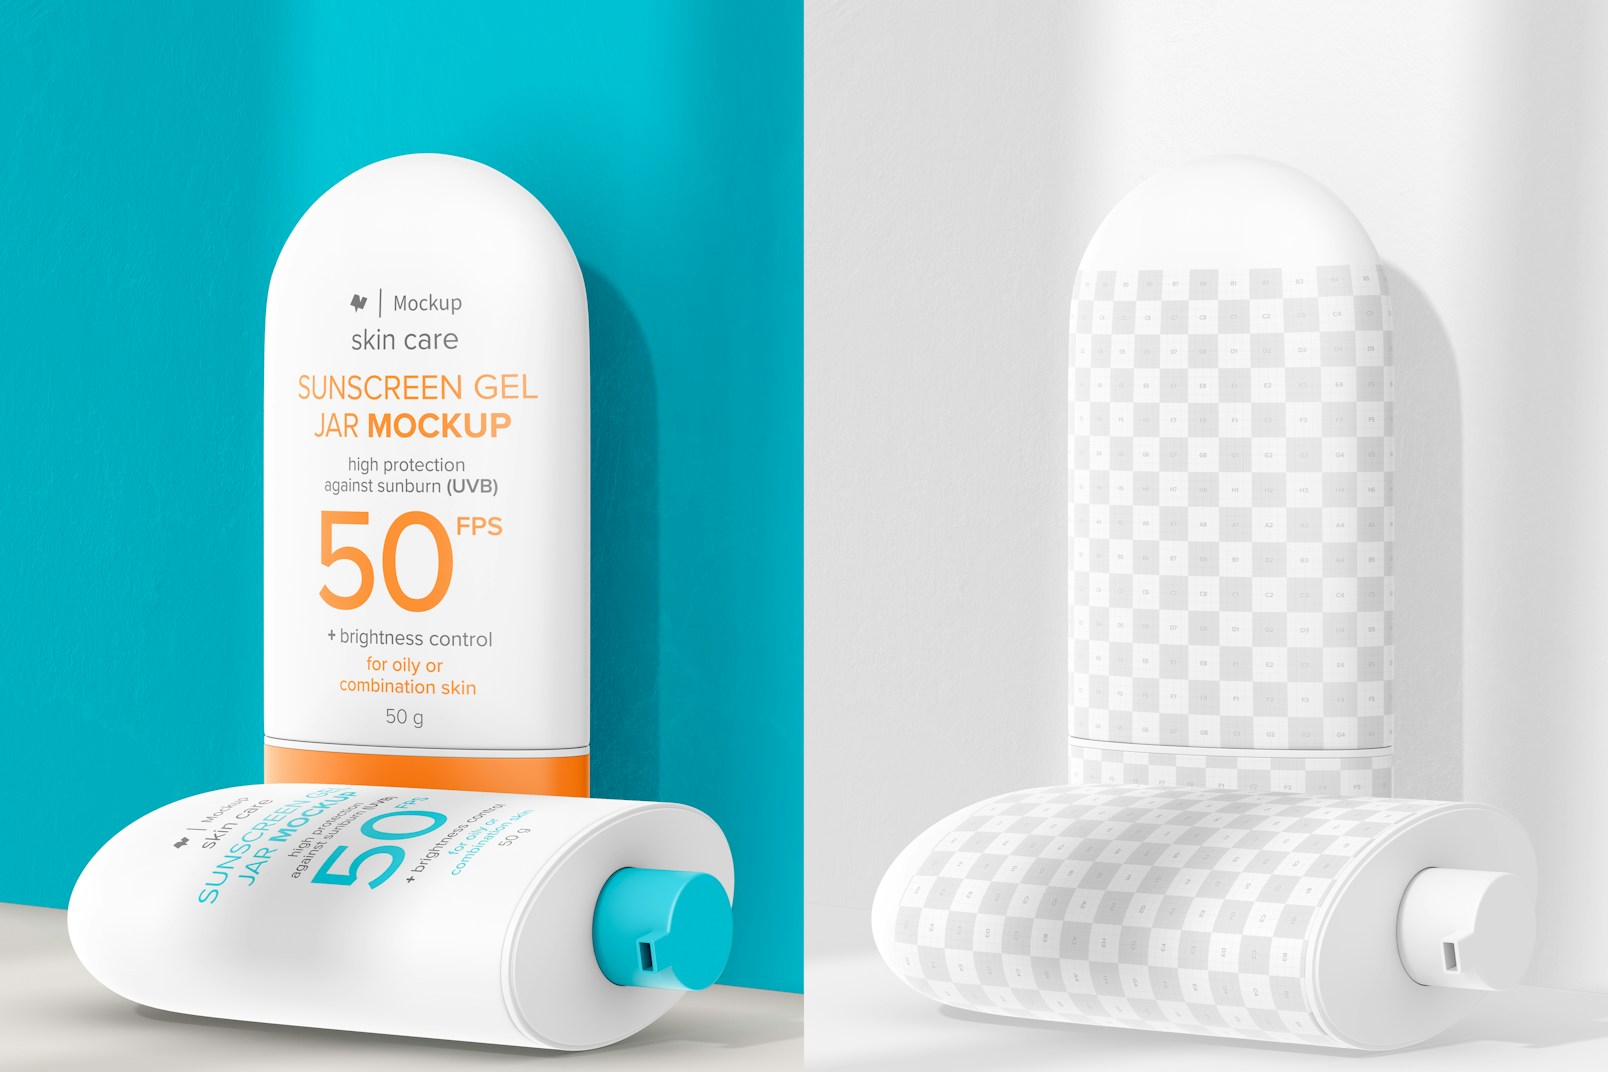 Sunscreen Gel Jars Mockup, Standing and Dropped